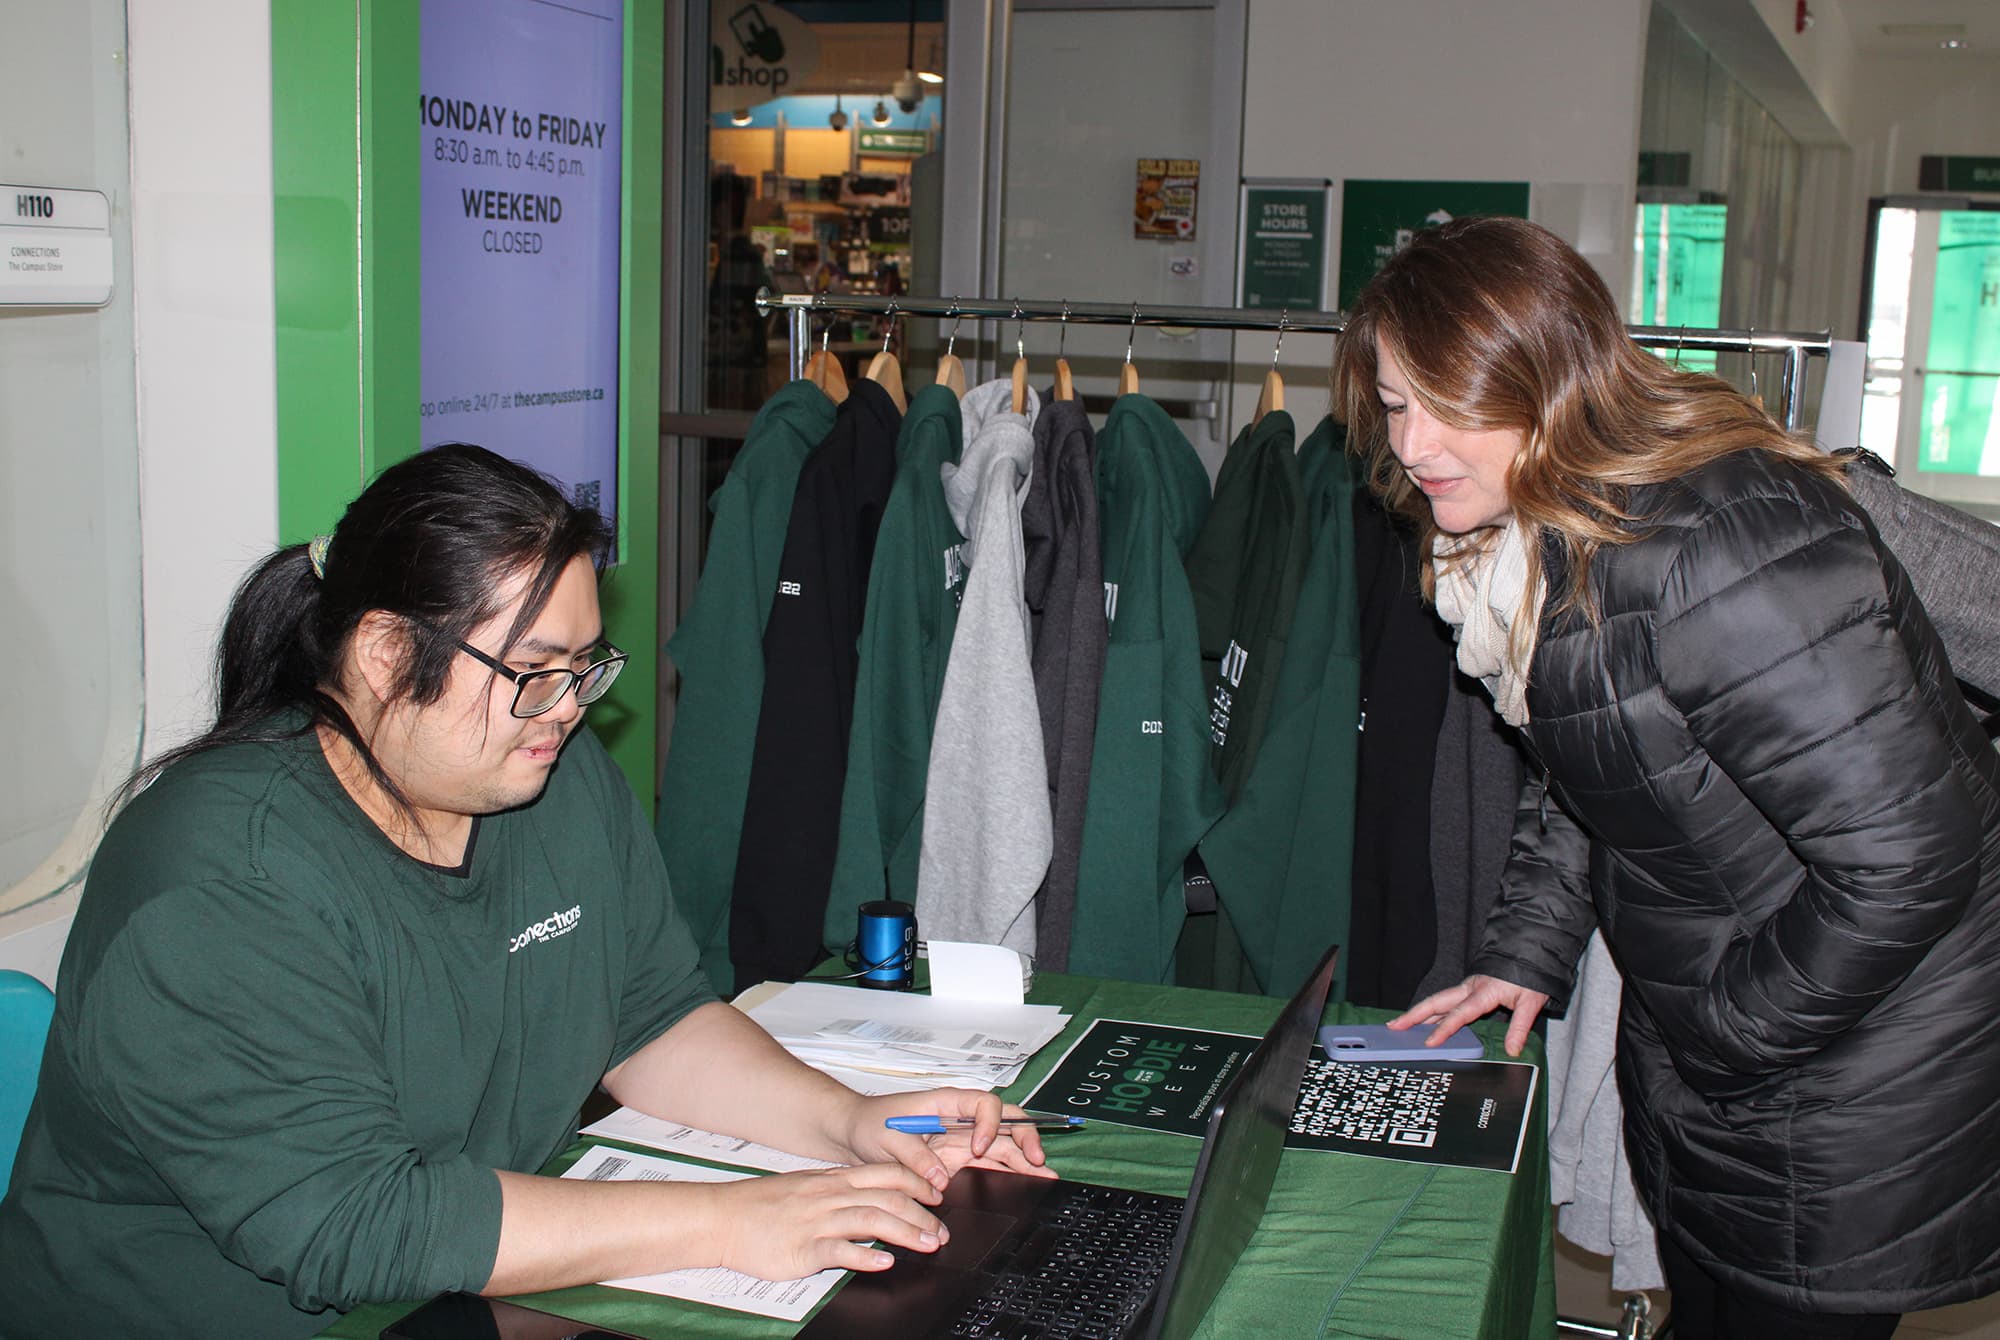 Chorn Lo, sales associate at the Connections store, takes an order for a custom hoodie from Shannon Reid, veterinary program curriculum coordinator.